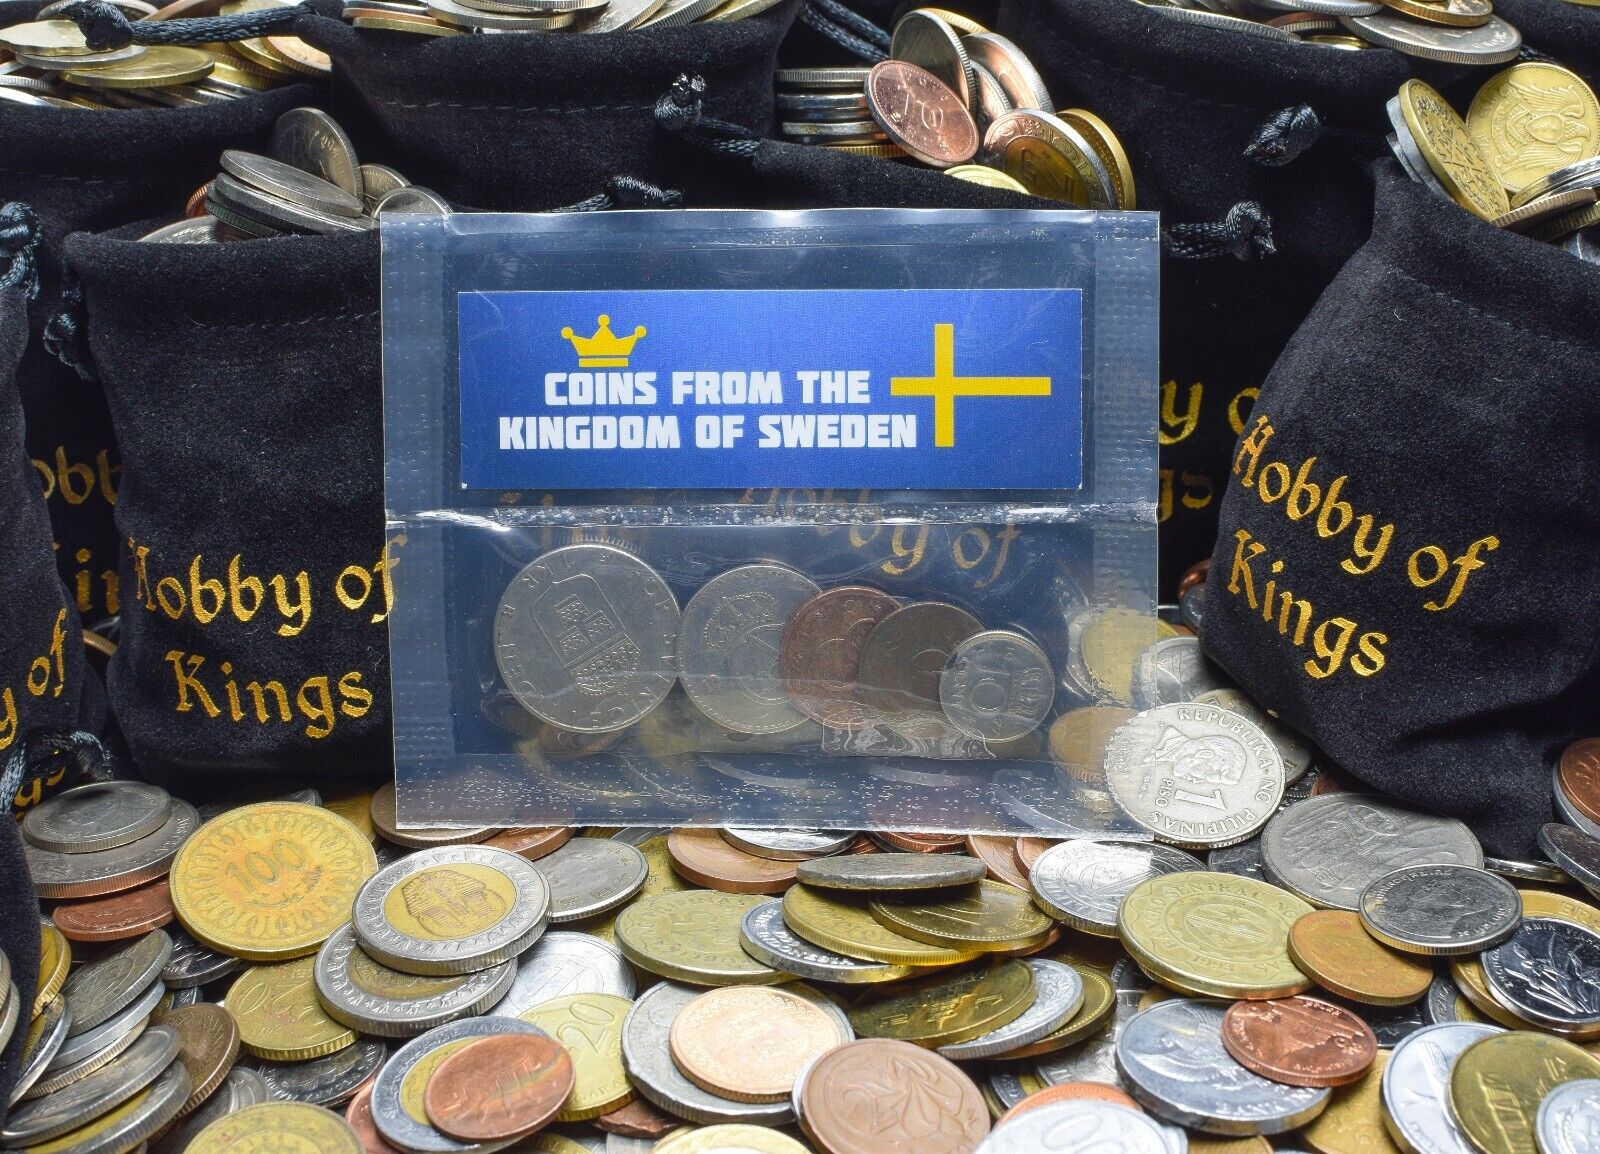 5 SWEDISH COINS DIFFERENT EUROPEAN COINS FOREIGN CURRENCY, VALUABLE MONEY Без бренда - фотография #3